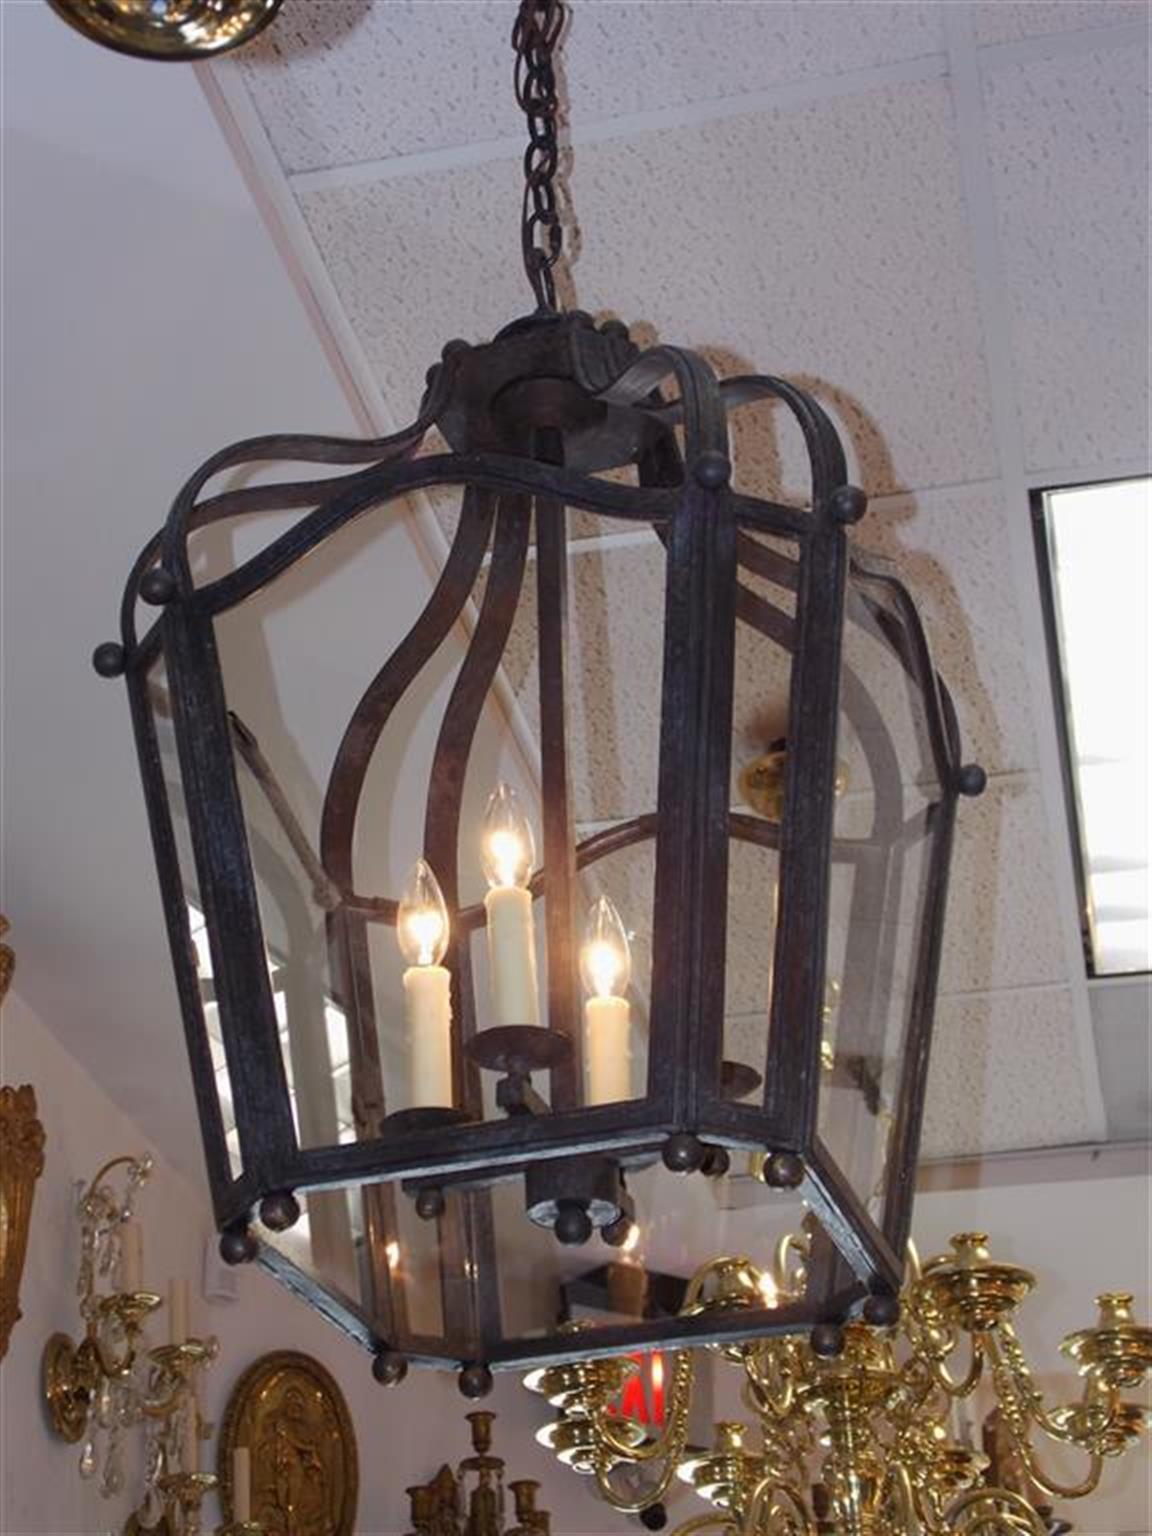 American wrought iron hanging lantern with arched scroll work, eight glass panels, four-light interior cluster, and adorned with exterior brass ball finials. Originally candle powered and has been electrified, Late 19th century